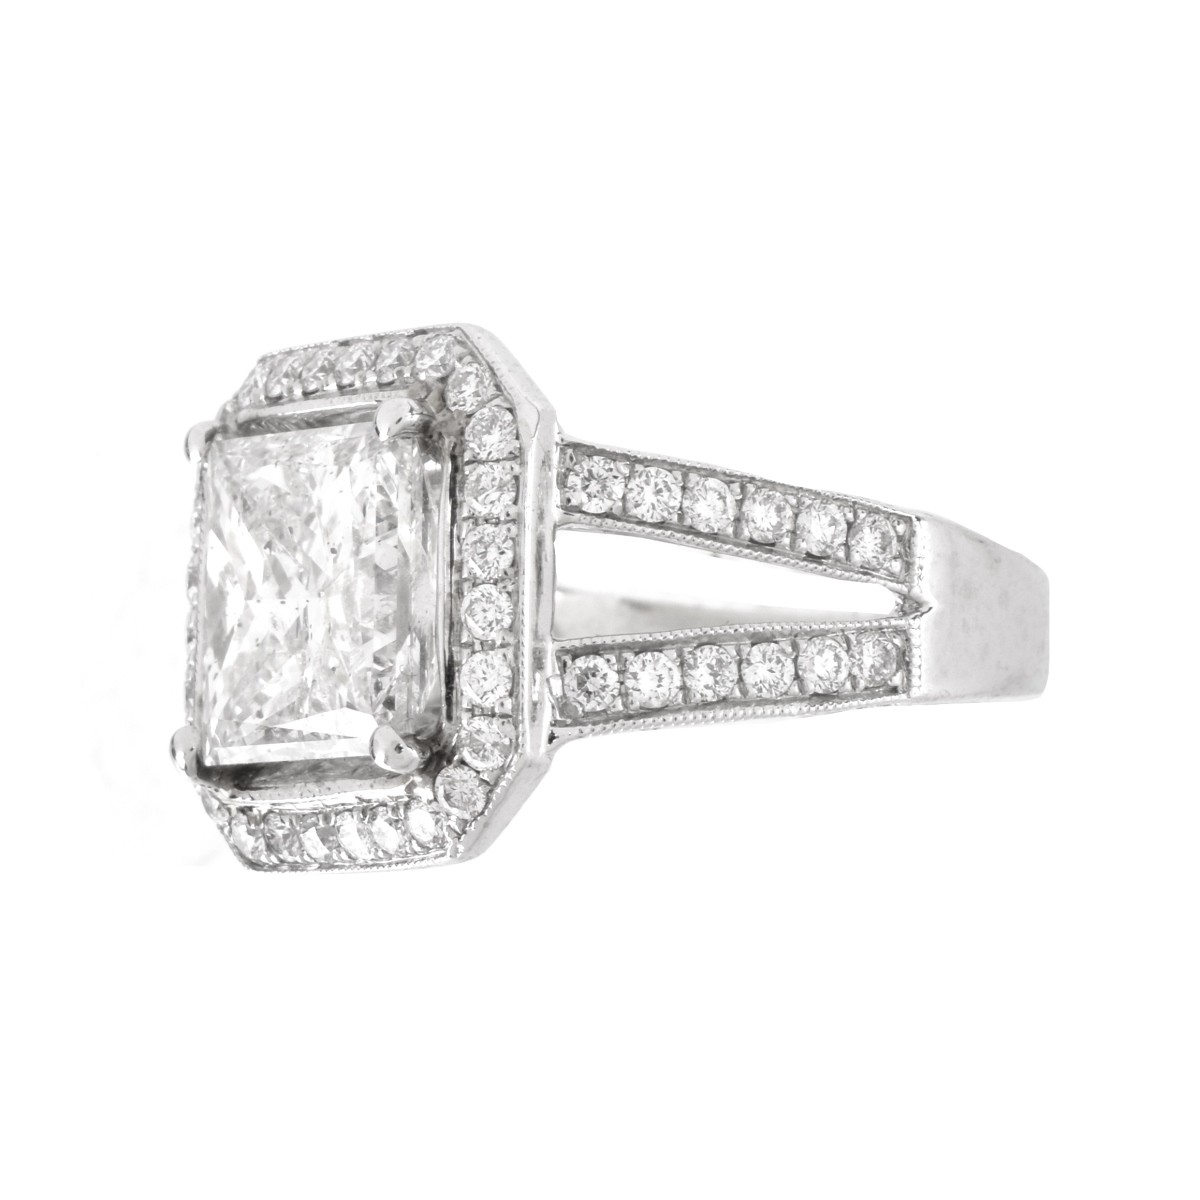 5.54ct TW Diamond and 14K Gold Ring